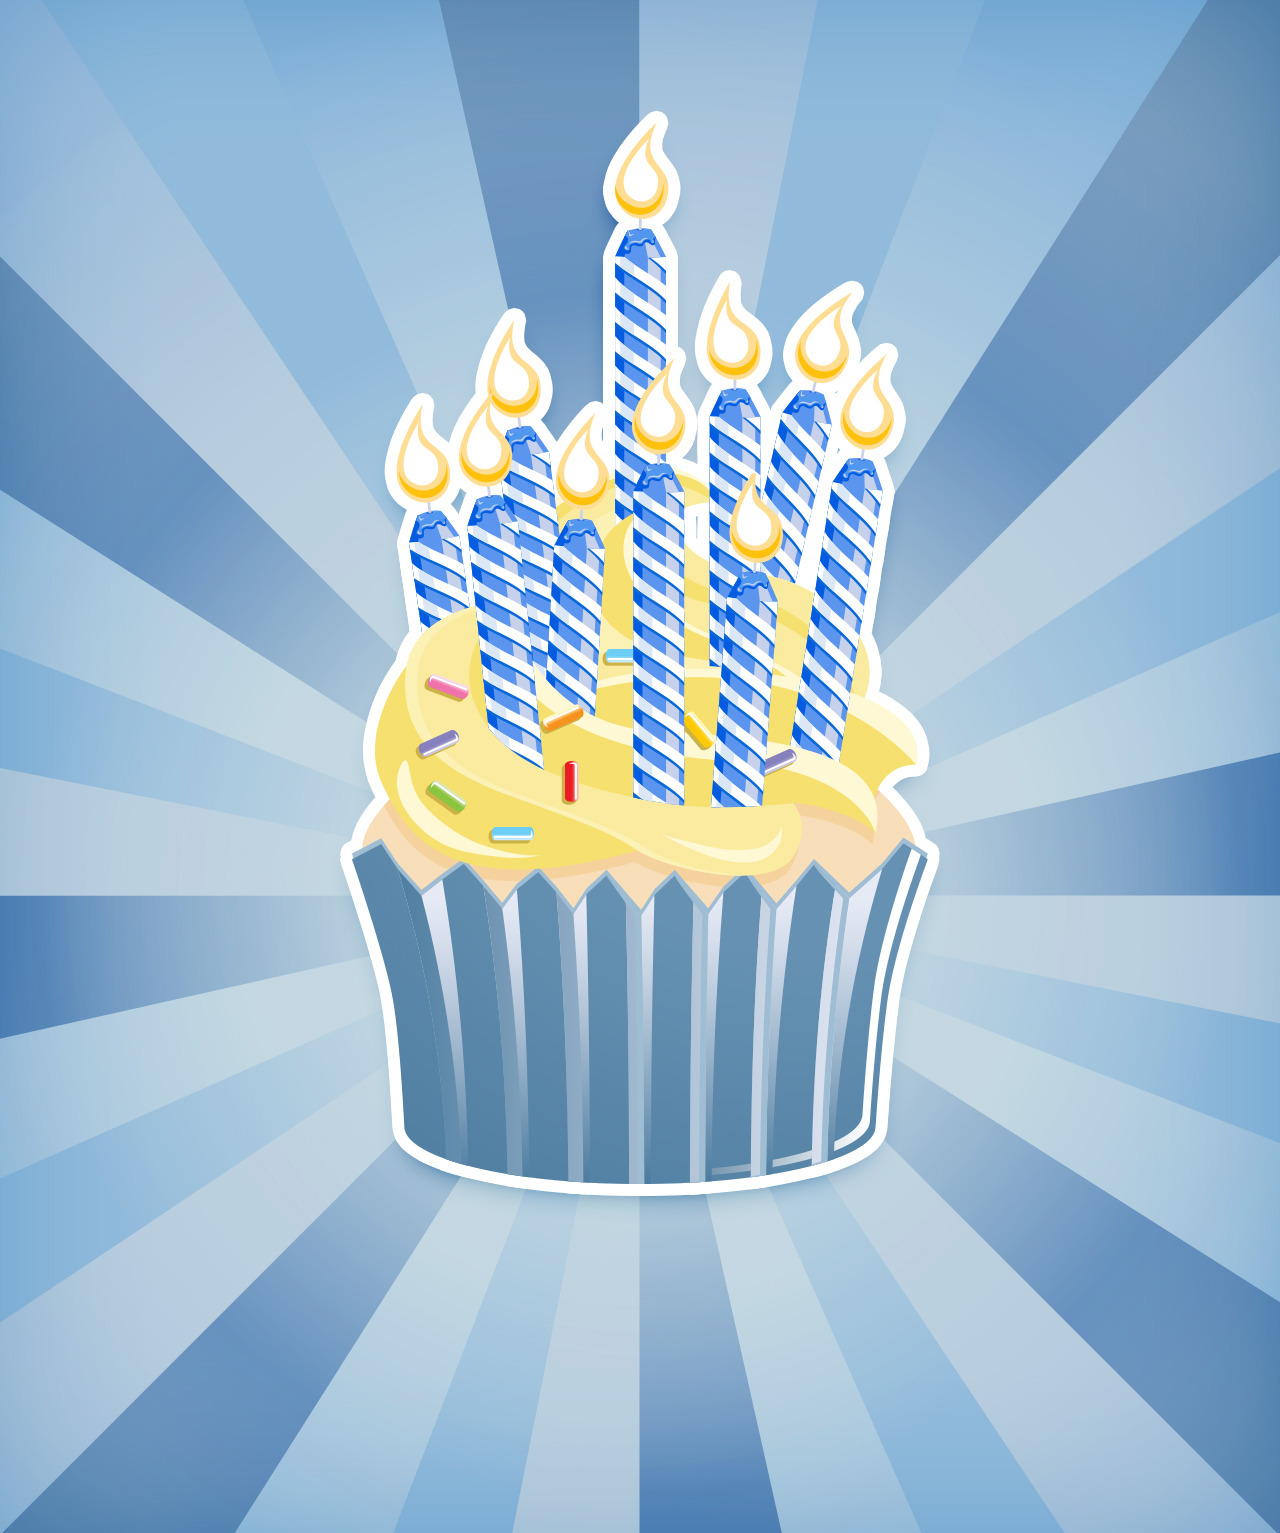 jtumblr turned 10 today!
Well… yesterday but… Yeahhh